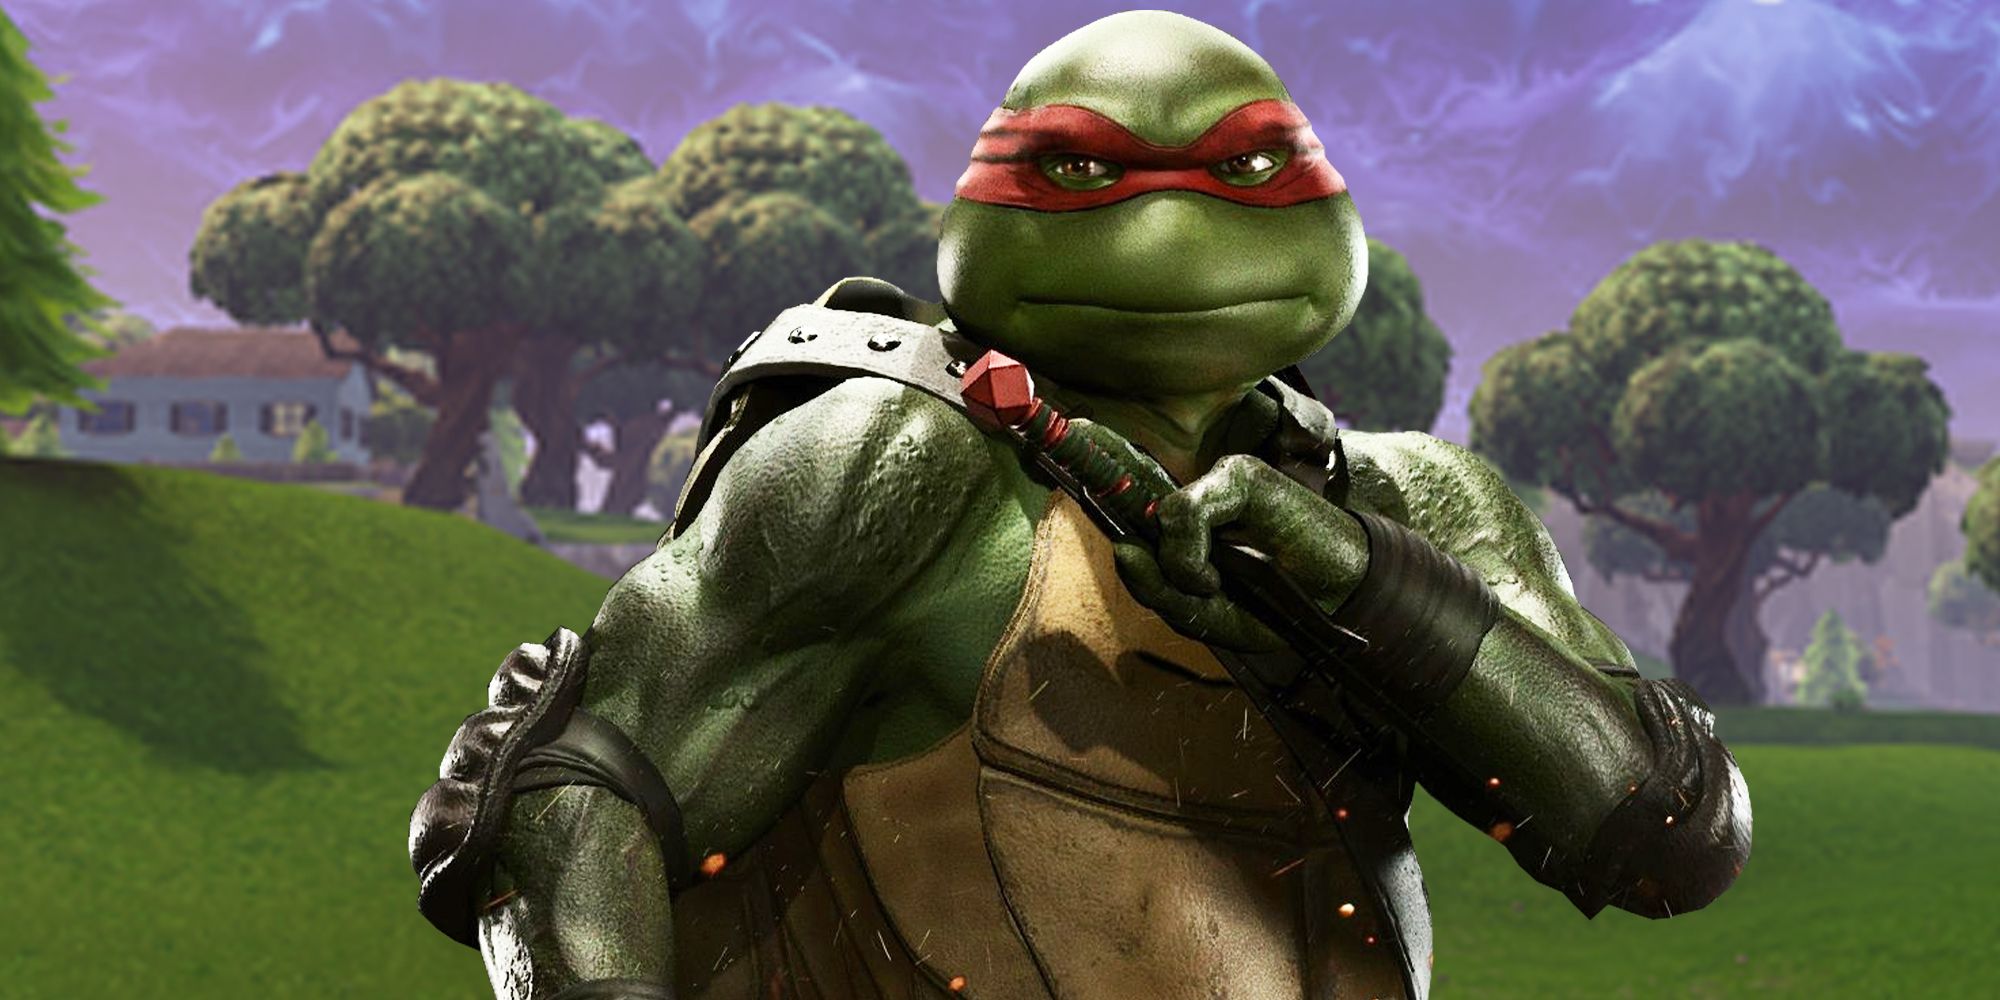 Fortnite field with a Teenage Mutant Ninja Turtle from Injustice 2